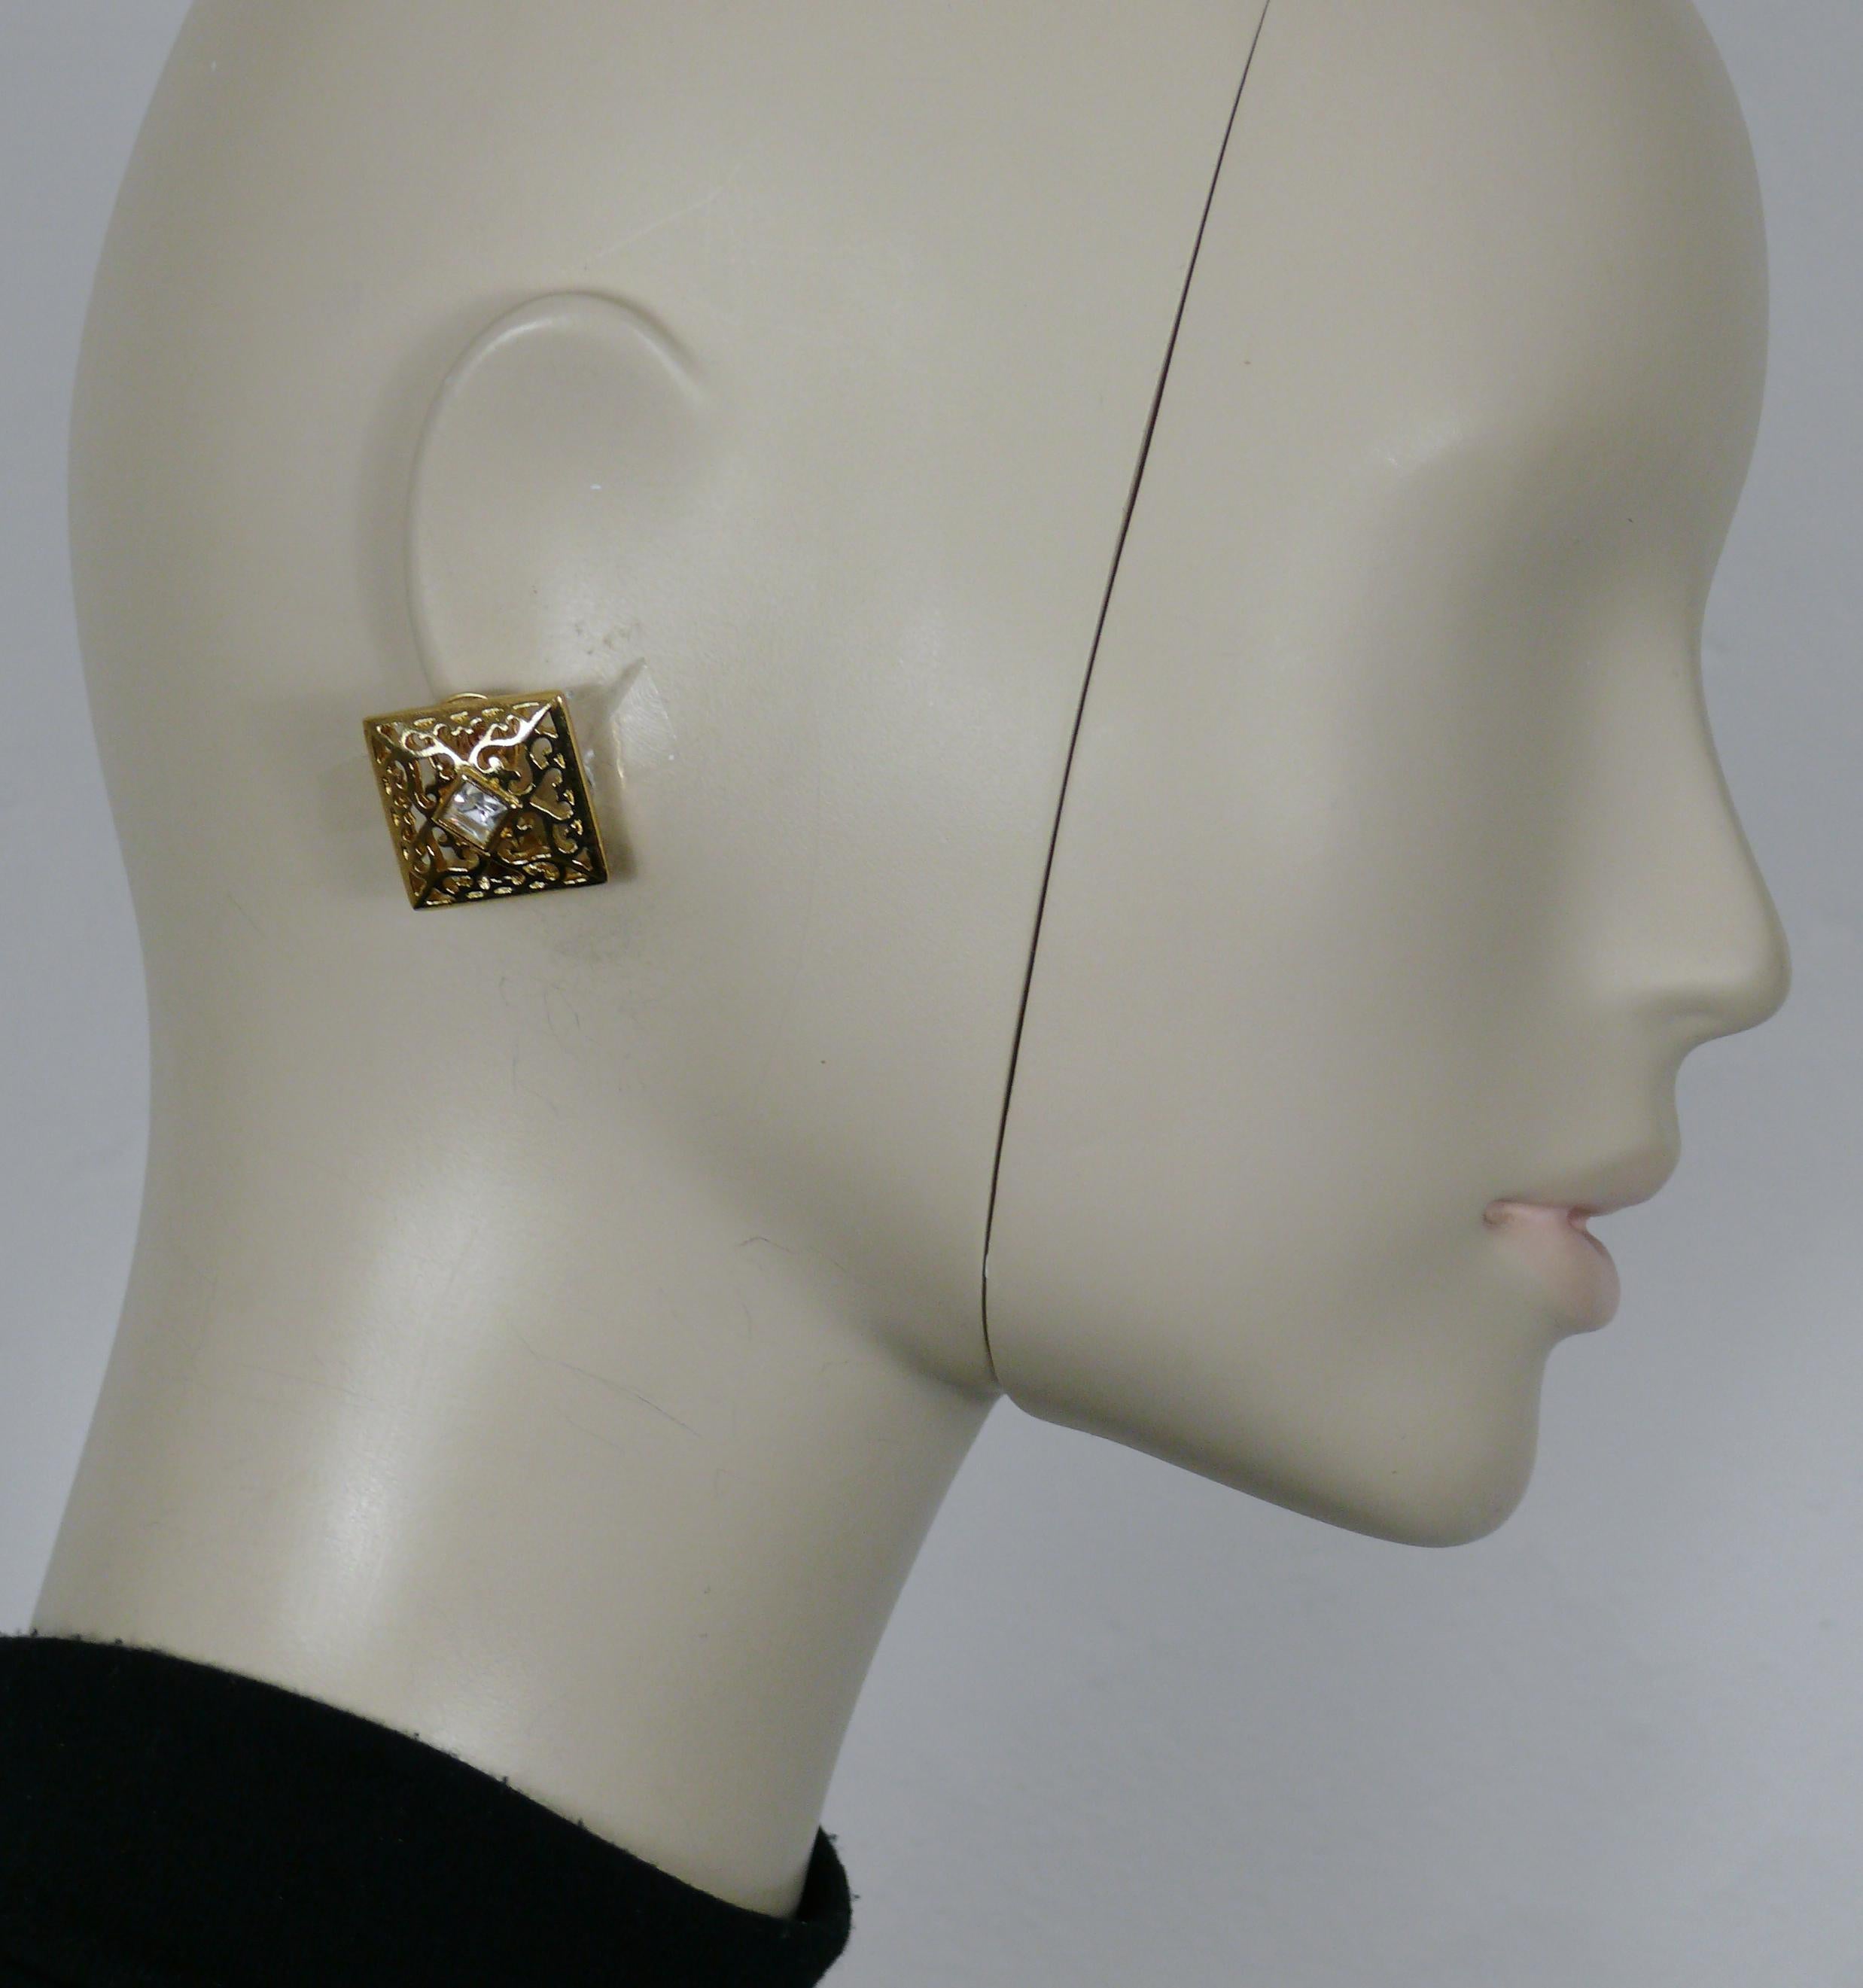 YVES SAINT LAURENT vintage gold tone openwork clip-on earrings embellished with a clear crystal at the center.

Embossed YSL.

Indicative measurements : height approx. 2.3 cm (0.91 inch) / width approx. 2.4 cm (0.94 inch).

Weight per earring :